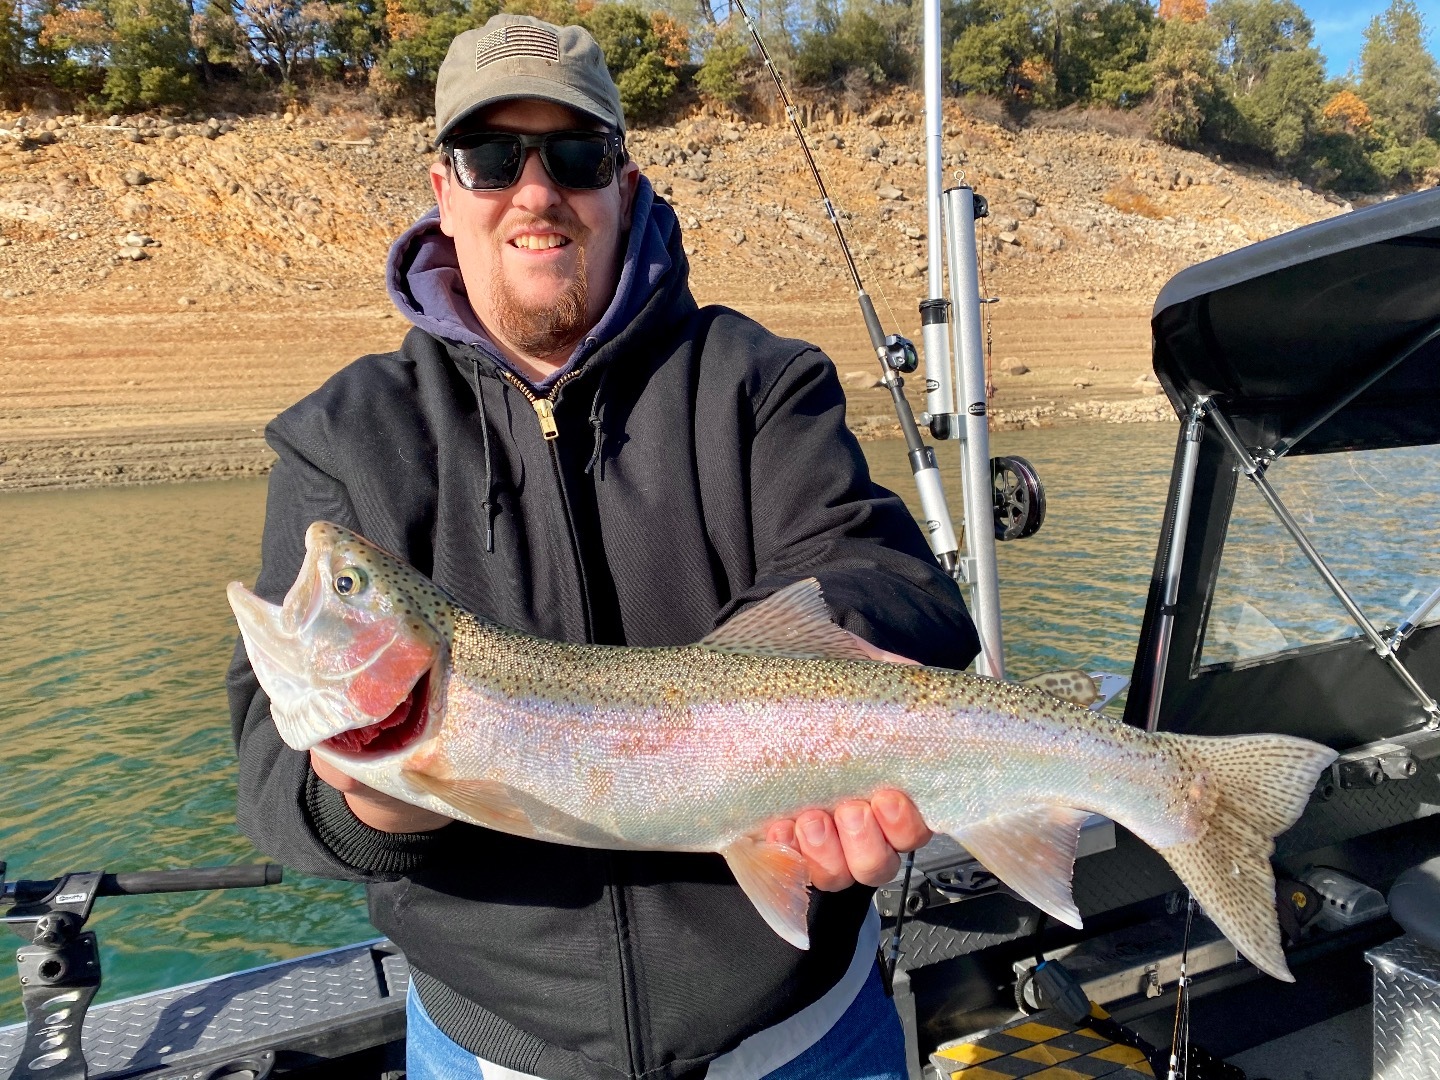 Shasta Lake trout are on the menu!